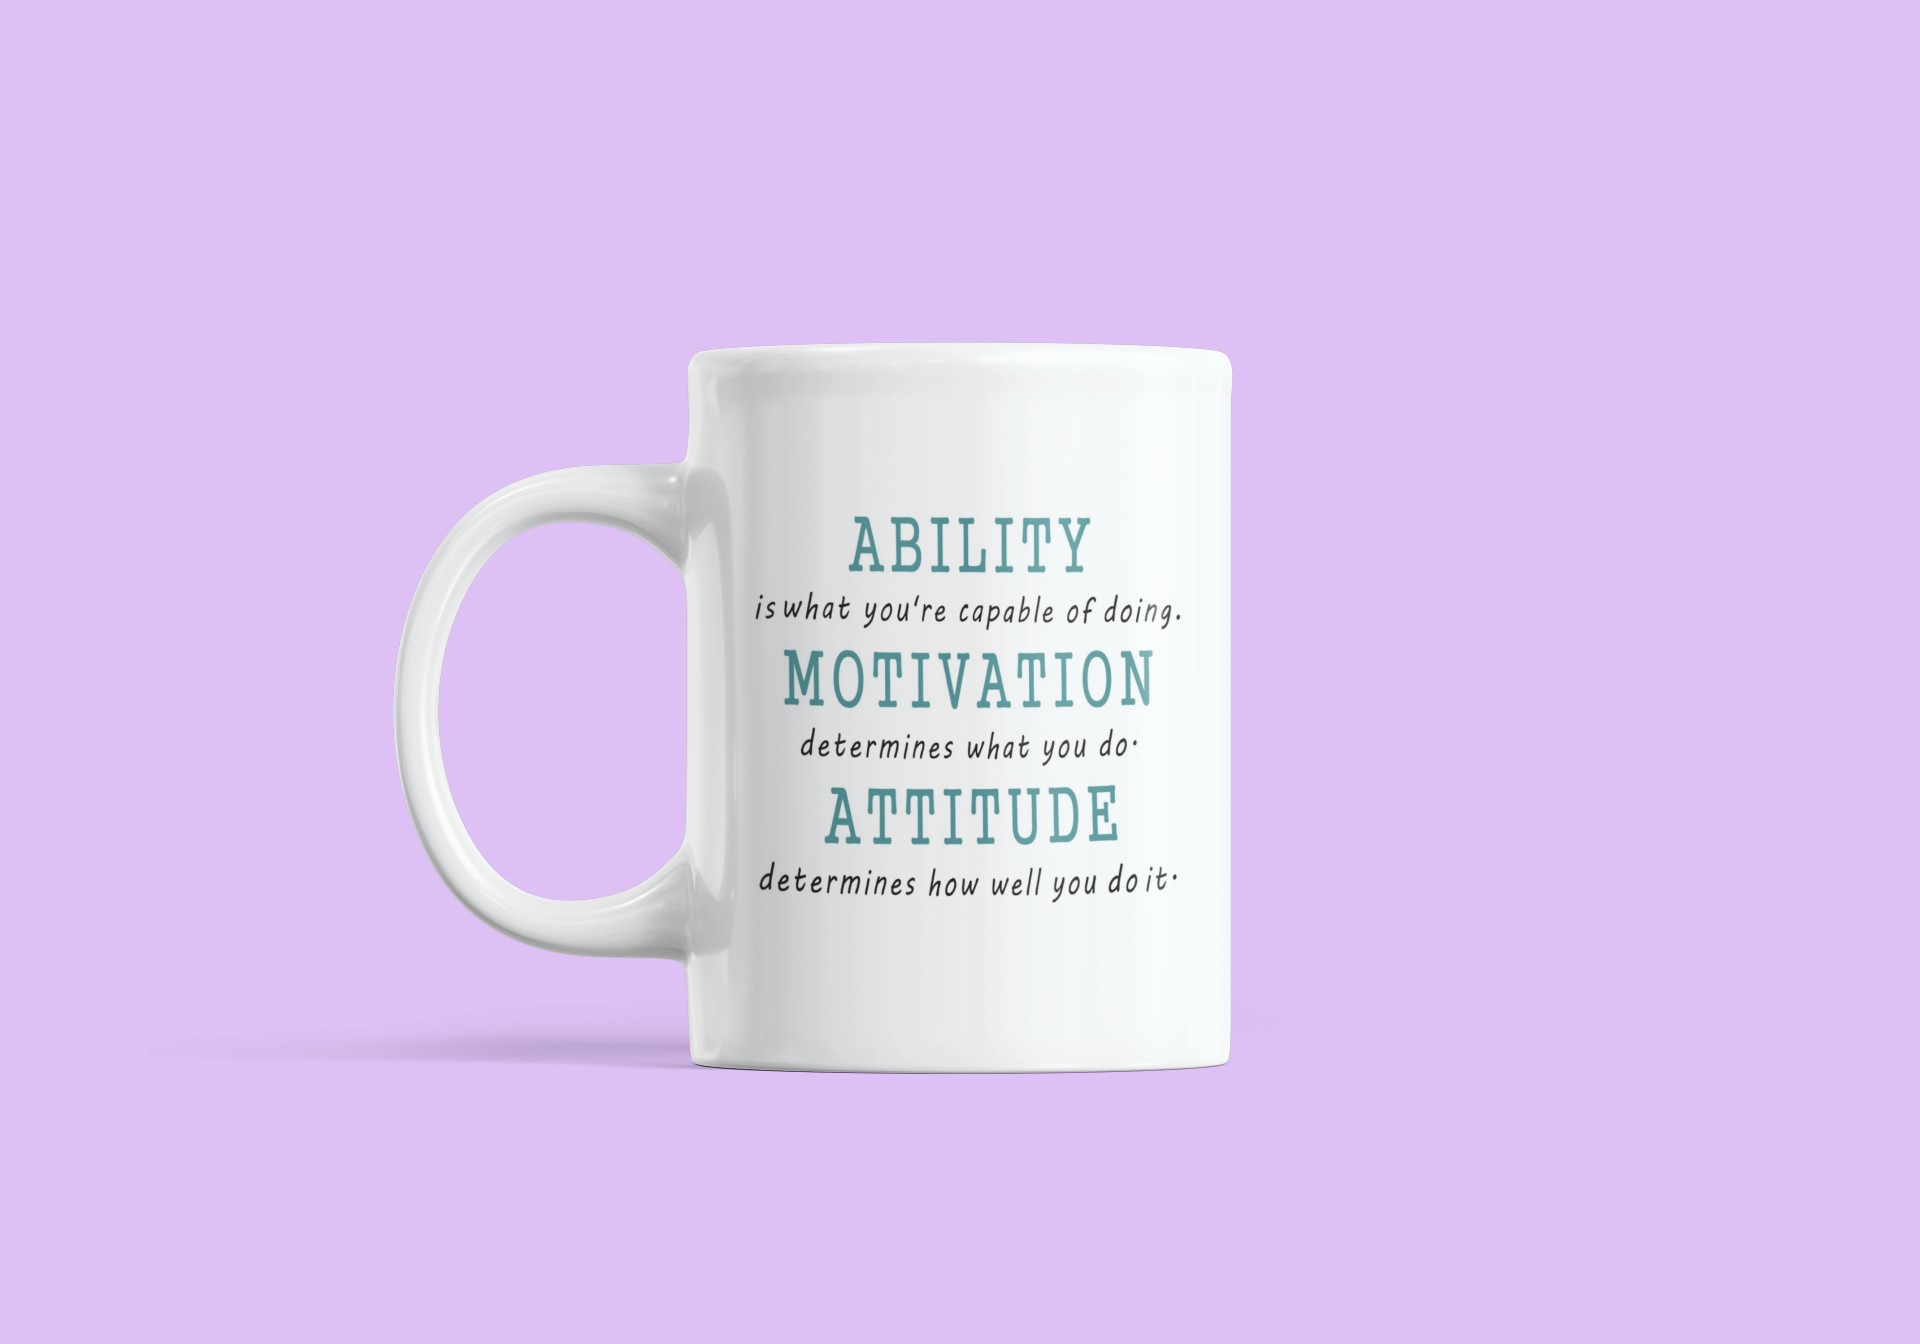 Motivation Mugs/ Can be customized on other side.